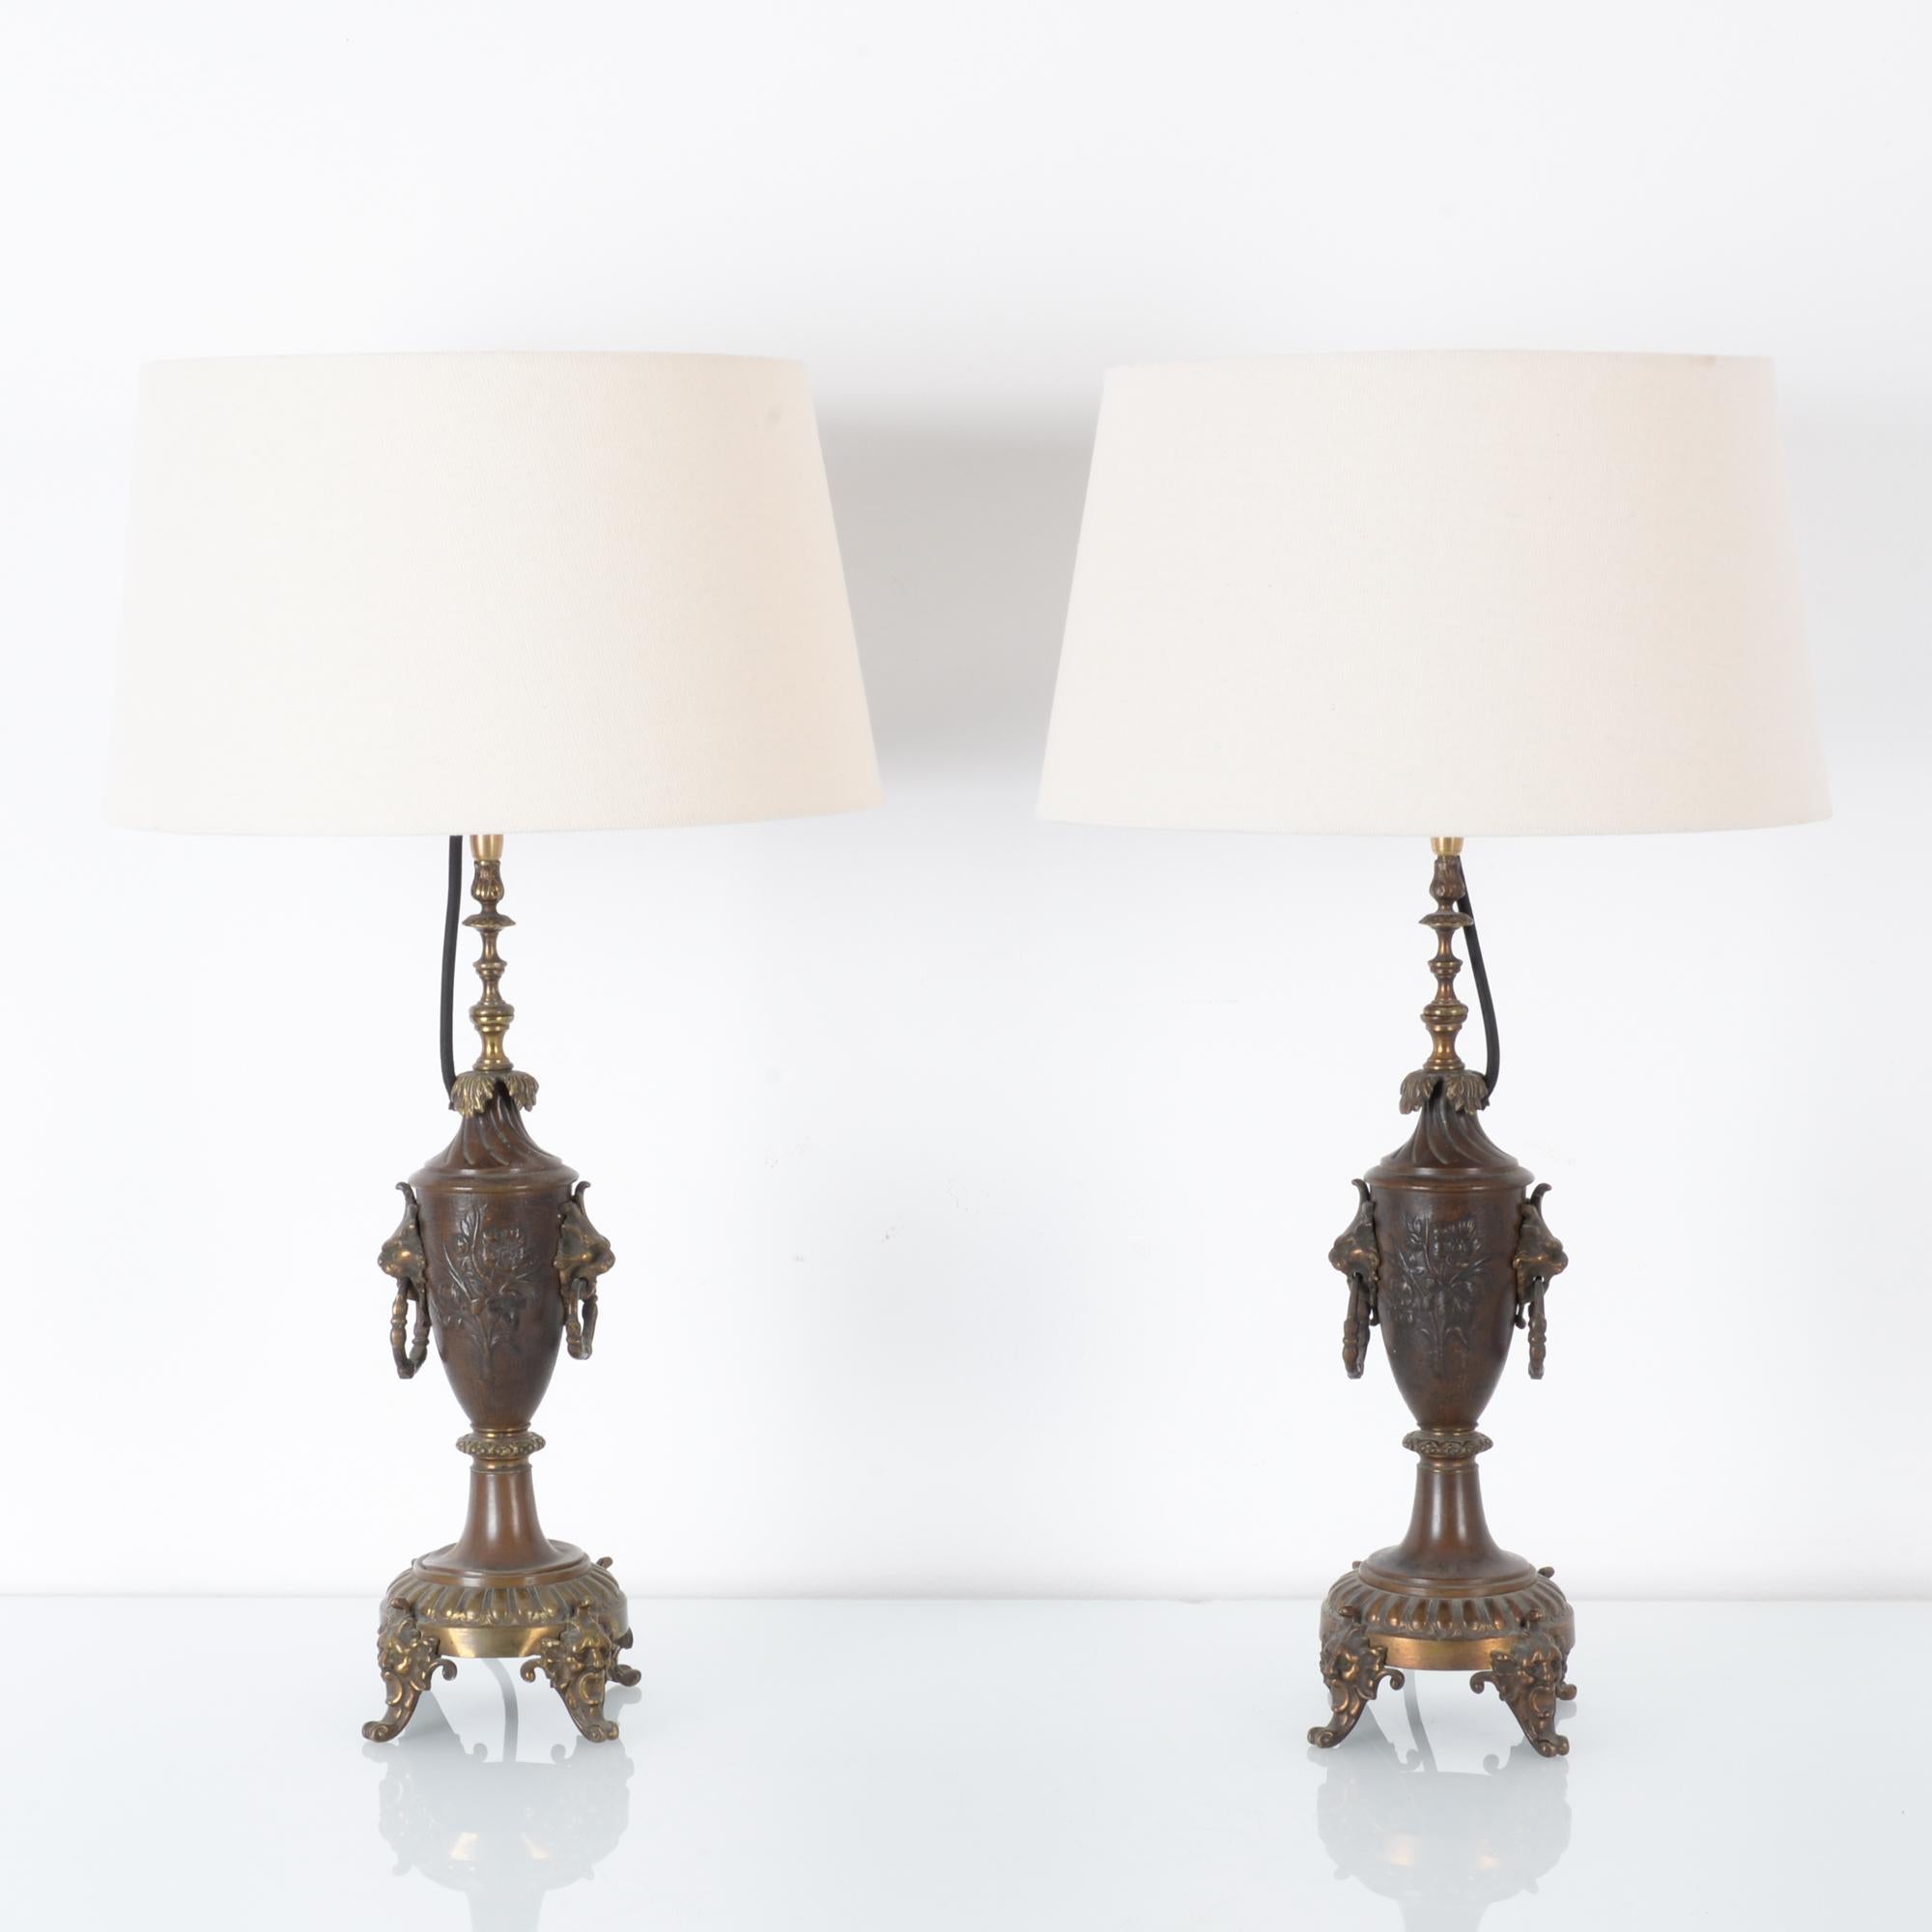 A pair of brass table lamps from France, circa 1900. A slender urn-shape upon a three-legged base is embellished by romantic fin de Siecle style ornament. Drooping leaves and swaying flowers transform into human faces and lion heads, holding rings